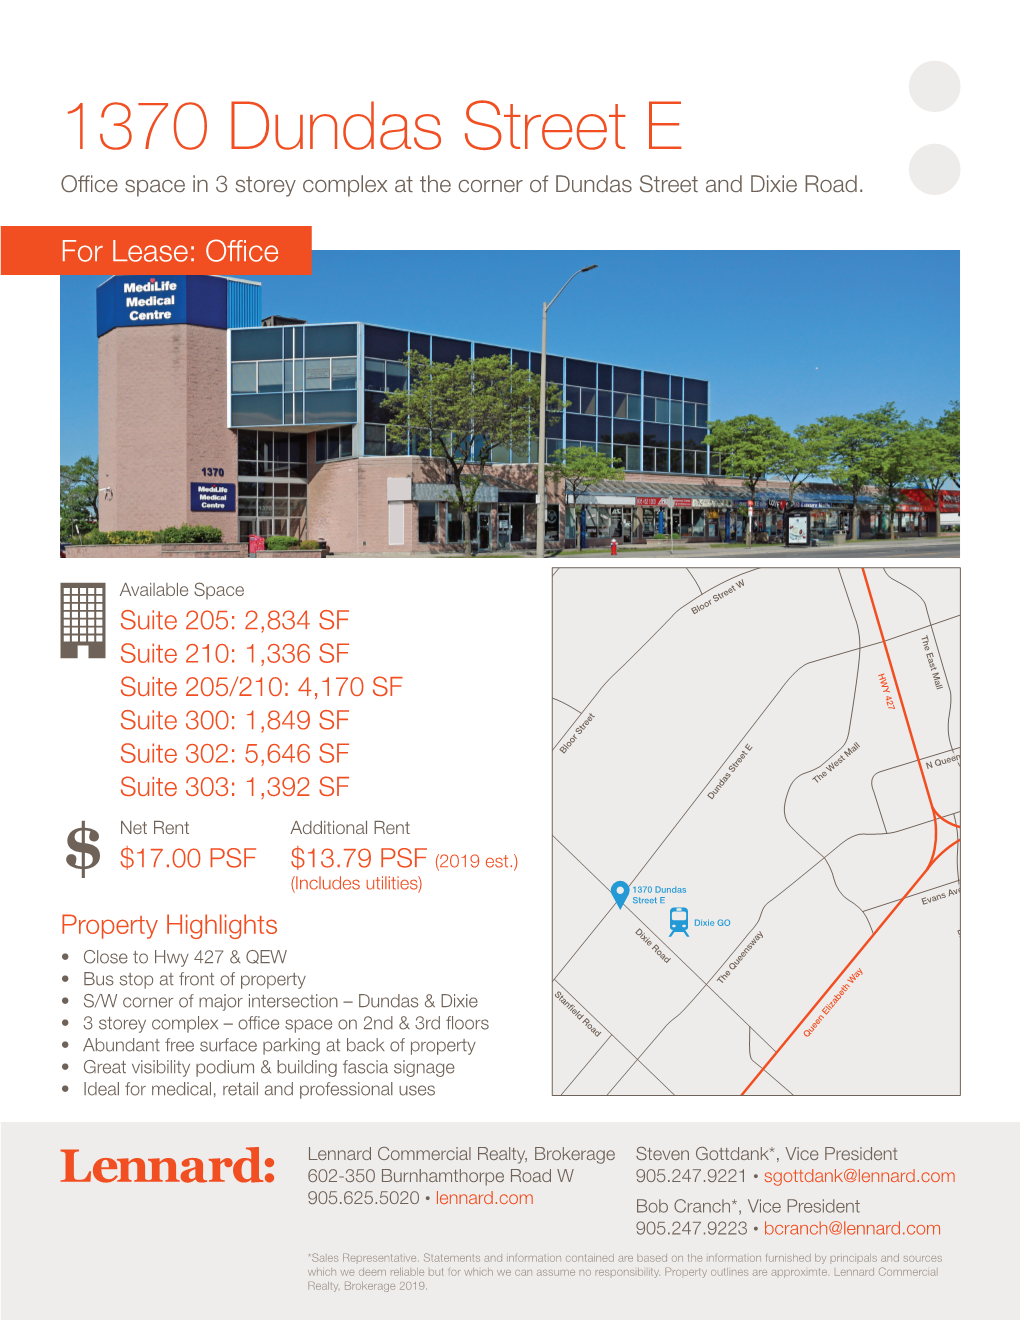 1370 Dundas Street E Office Space in 3 Storey Complex at the Corner of Dundas Street and Dixie Road